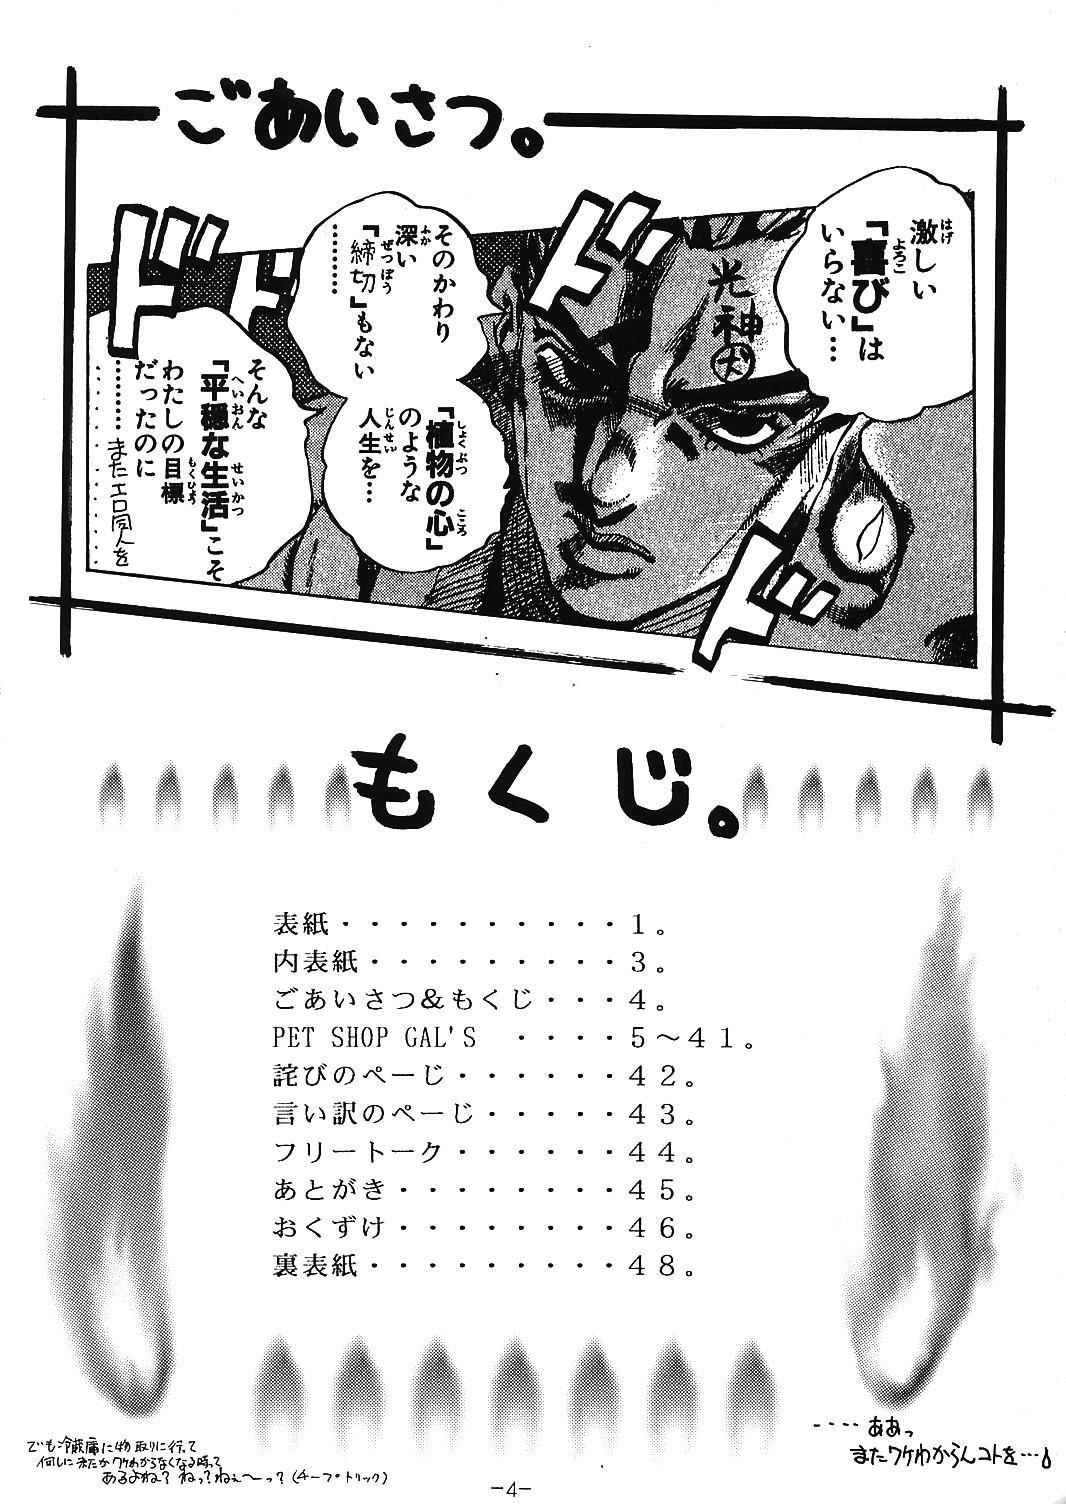 Spit PANST LINE - King of fighters Chupando - Page 3